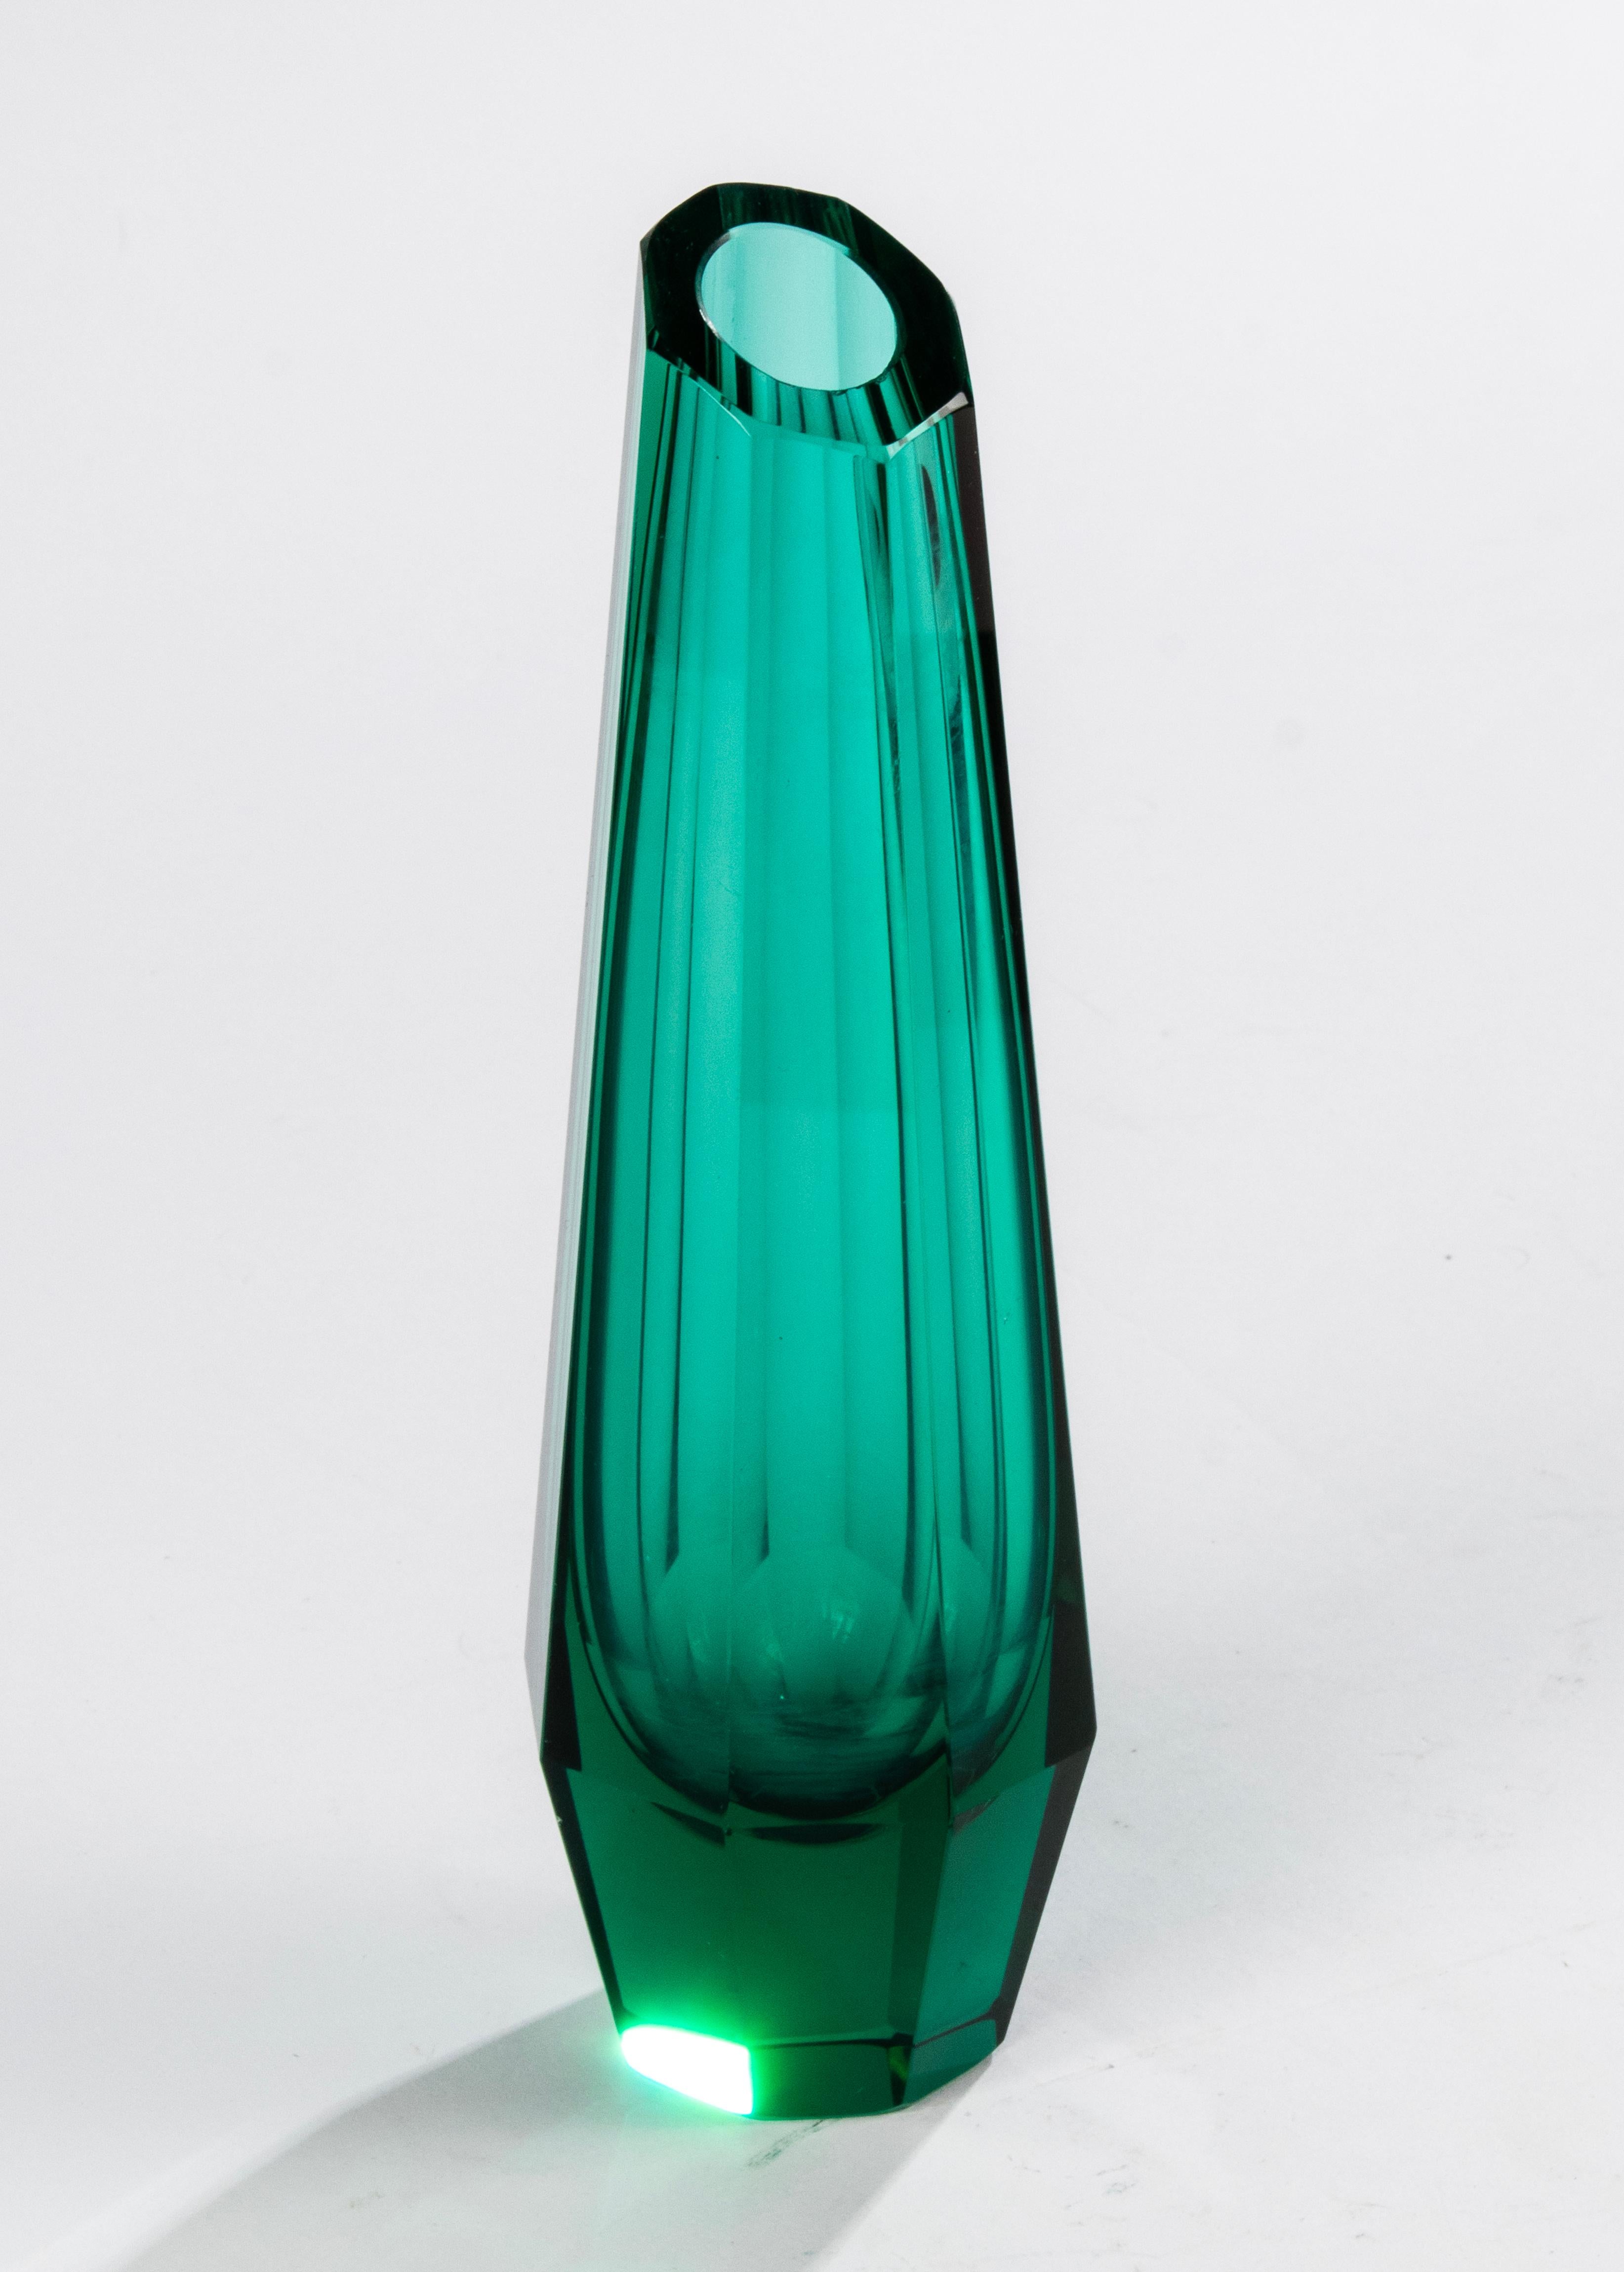 1930's Art Deco Crystal Vase - Attributed to Josef Hoffmann for Moser For Sale 1